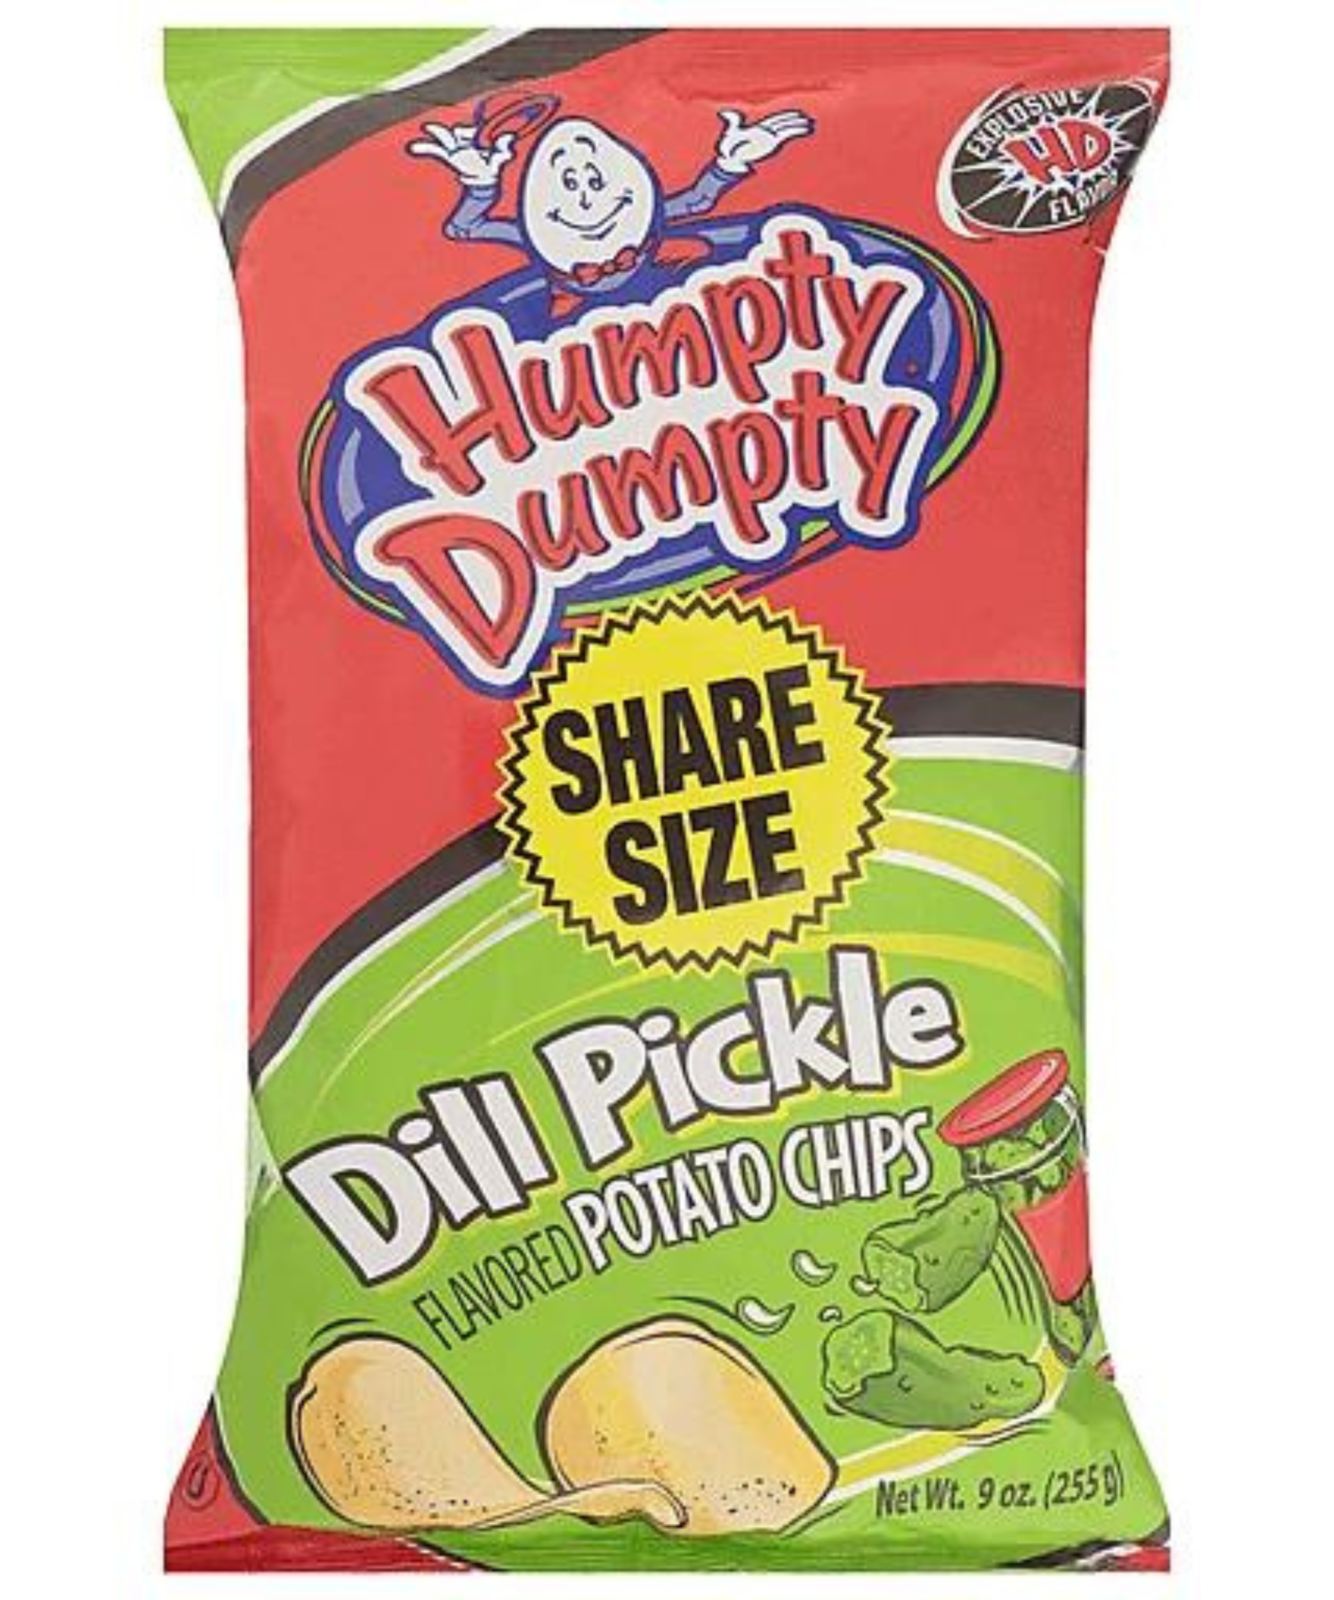 "Pack of 5 - 8 Oz Humpty Dumpty Dill Pickle Chips: Crisp & Flavorful!" - $24.00